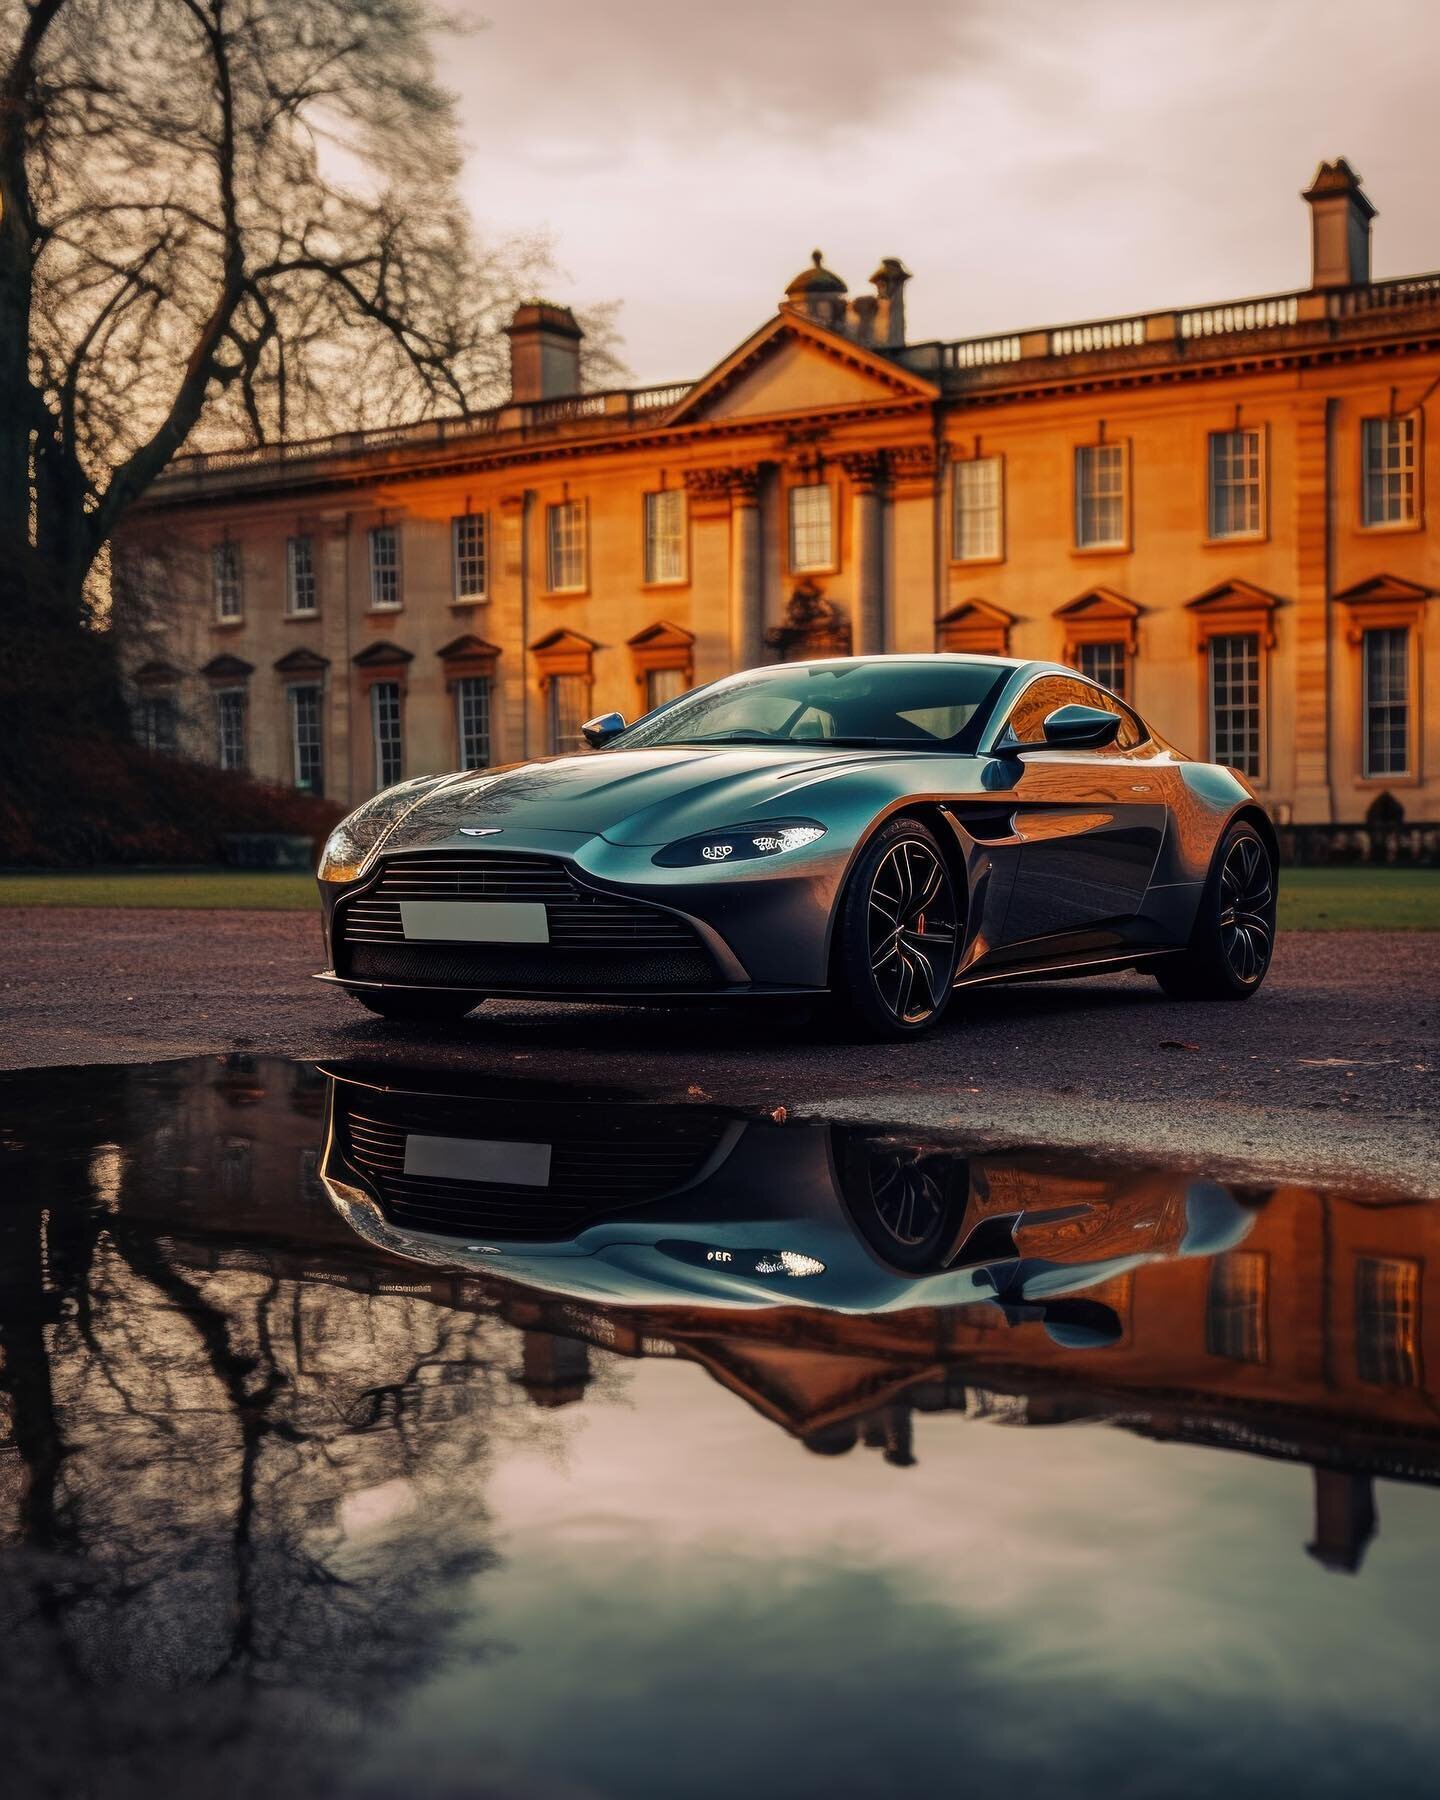 Waiting for a spot of tea 🫖 with the King. 🤴🏻🇬🇧 

#england #astonmartin #vantage #astonmartinvantage